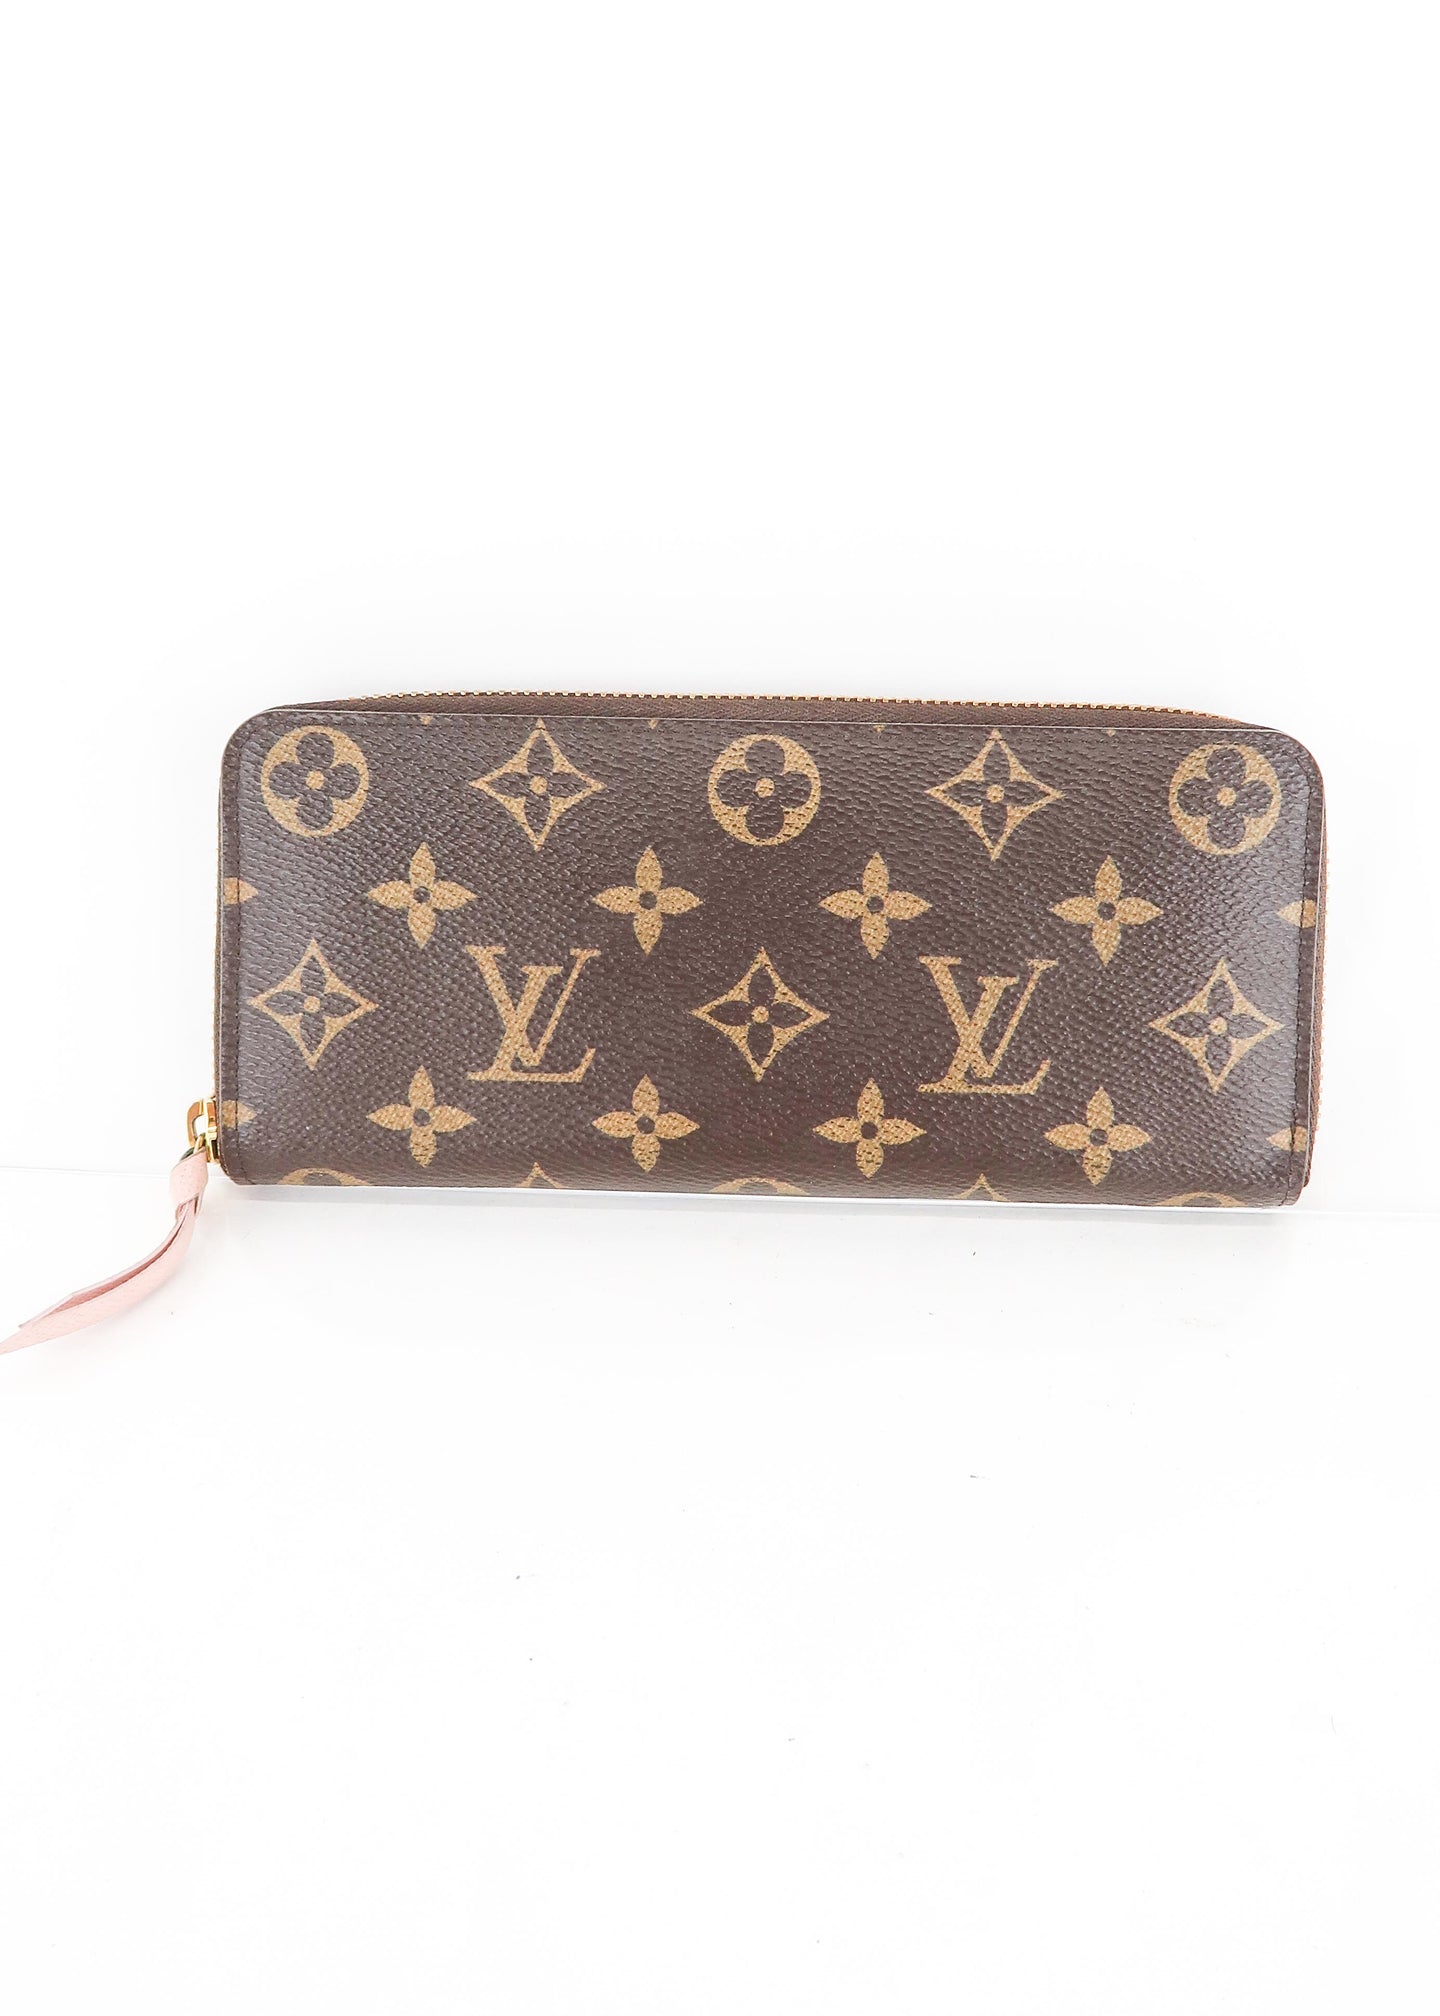 Louis Vuitton Clemence Wallet Monogram Brown/Berry in Coated Canvas - US